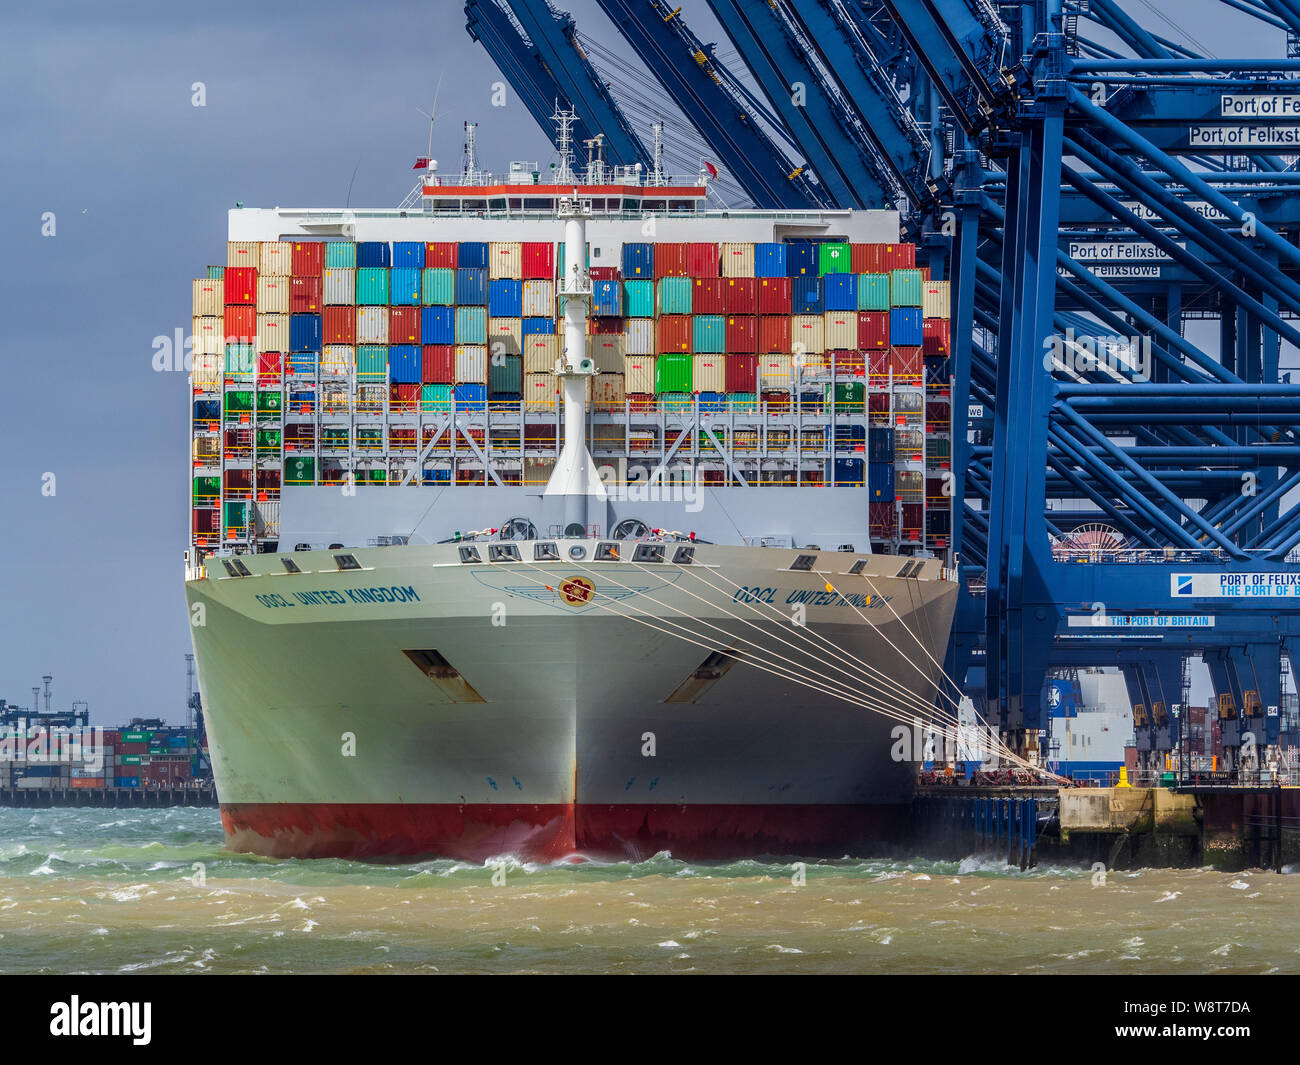 OOCL United Kingdom vessel docked at Felixstowe Port to load and unload containers. OOCL is a Hong Kong based shipping company. Stock Photo